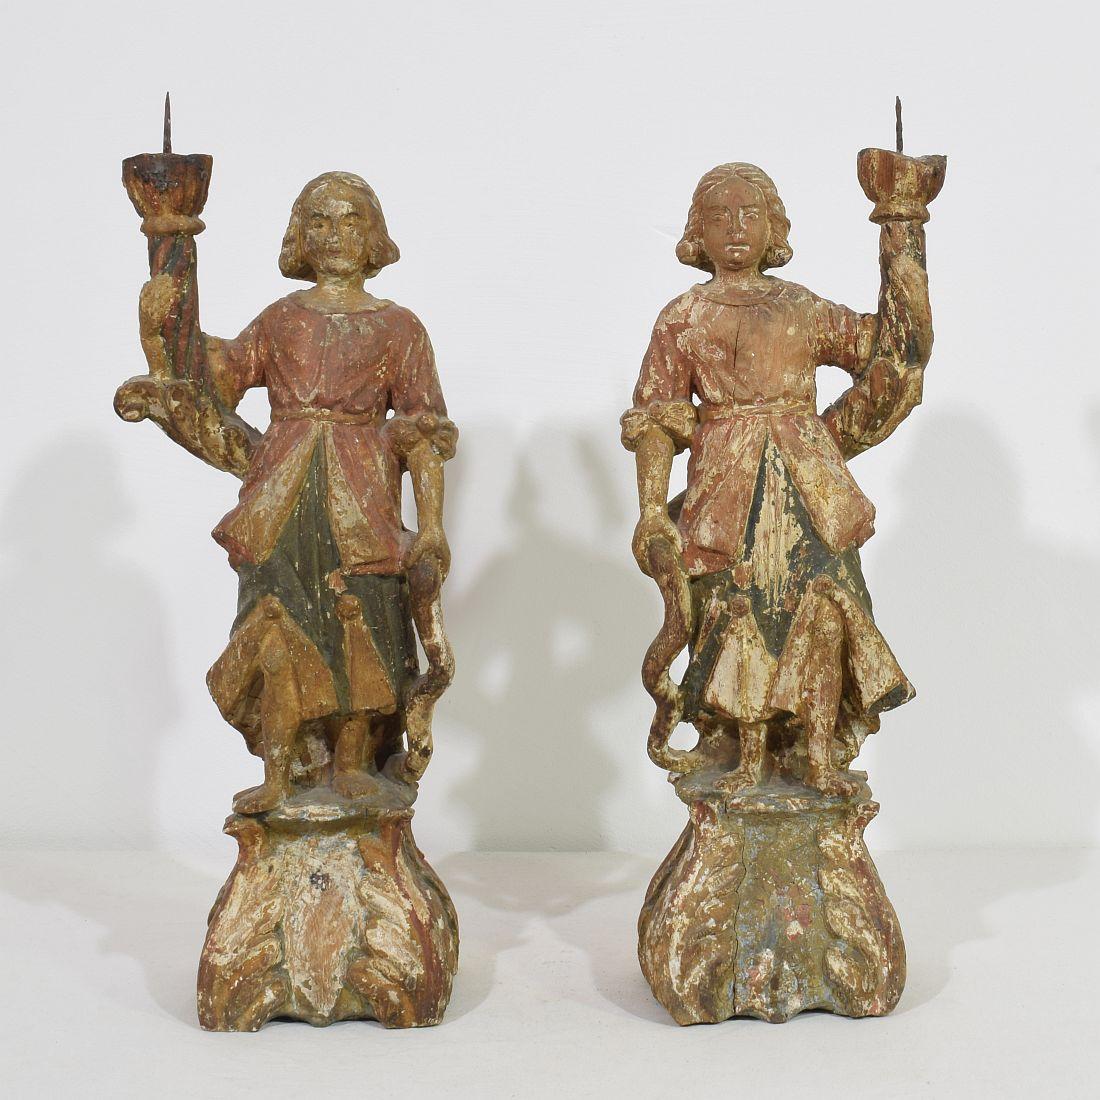 Hand-Carved Pair of 17th Century Italian Baroque Angel Figures with Candleholders